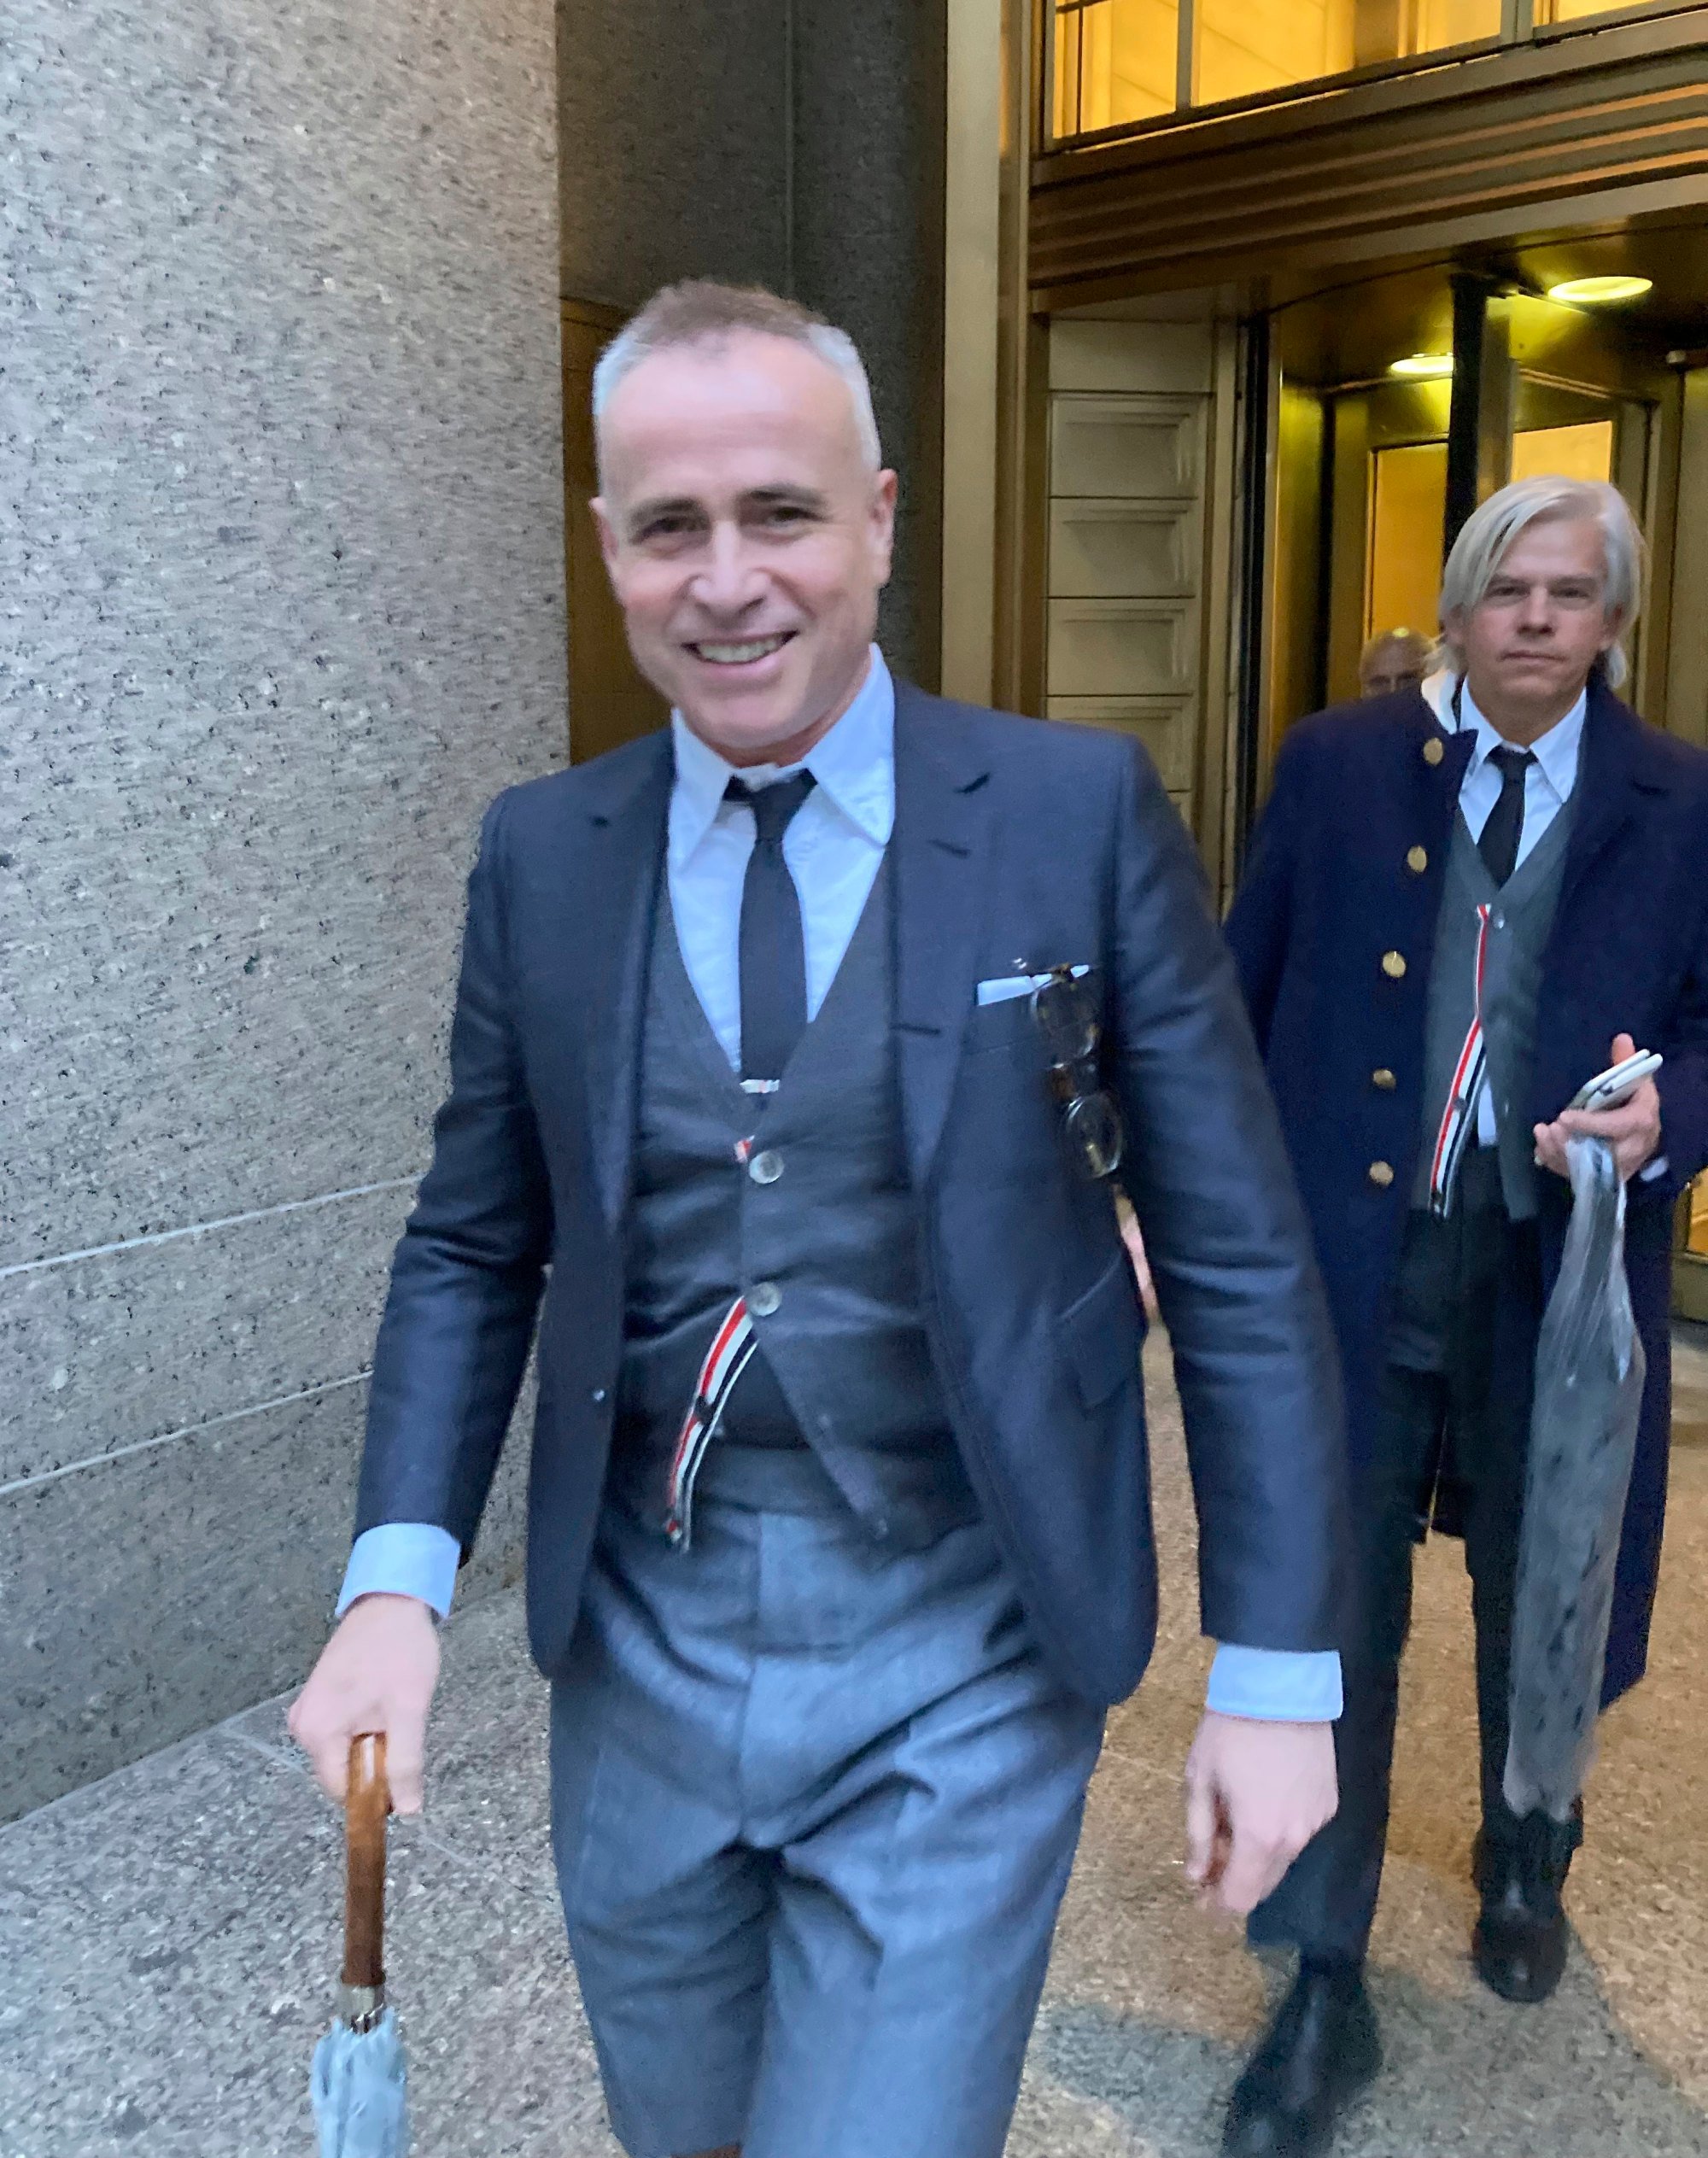 Meet Thom Browne, the designer who beat Adidas in court: stripes-loving American styled NBA star LeBron James and Gigi Hadid and is the current chairman of CFDA, after Tom Ford